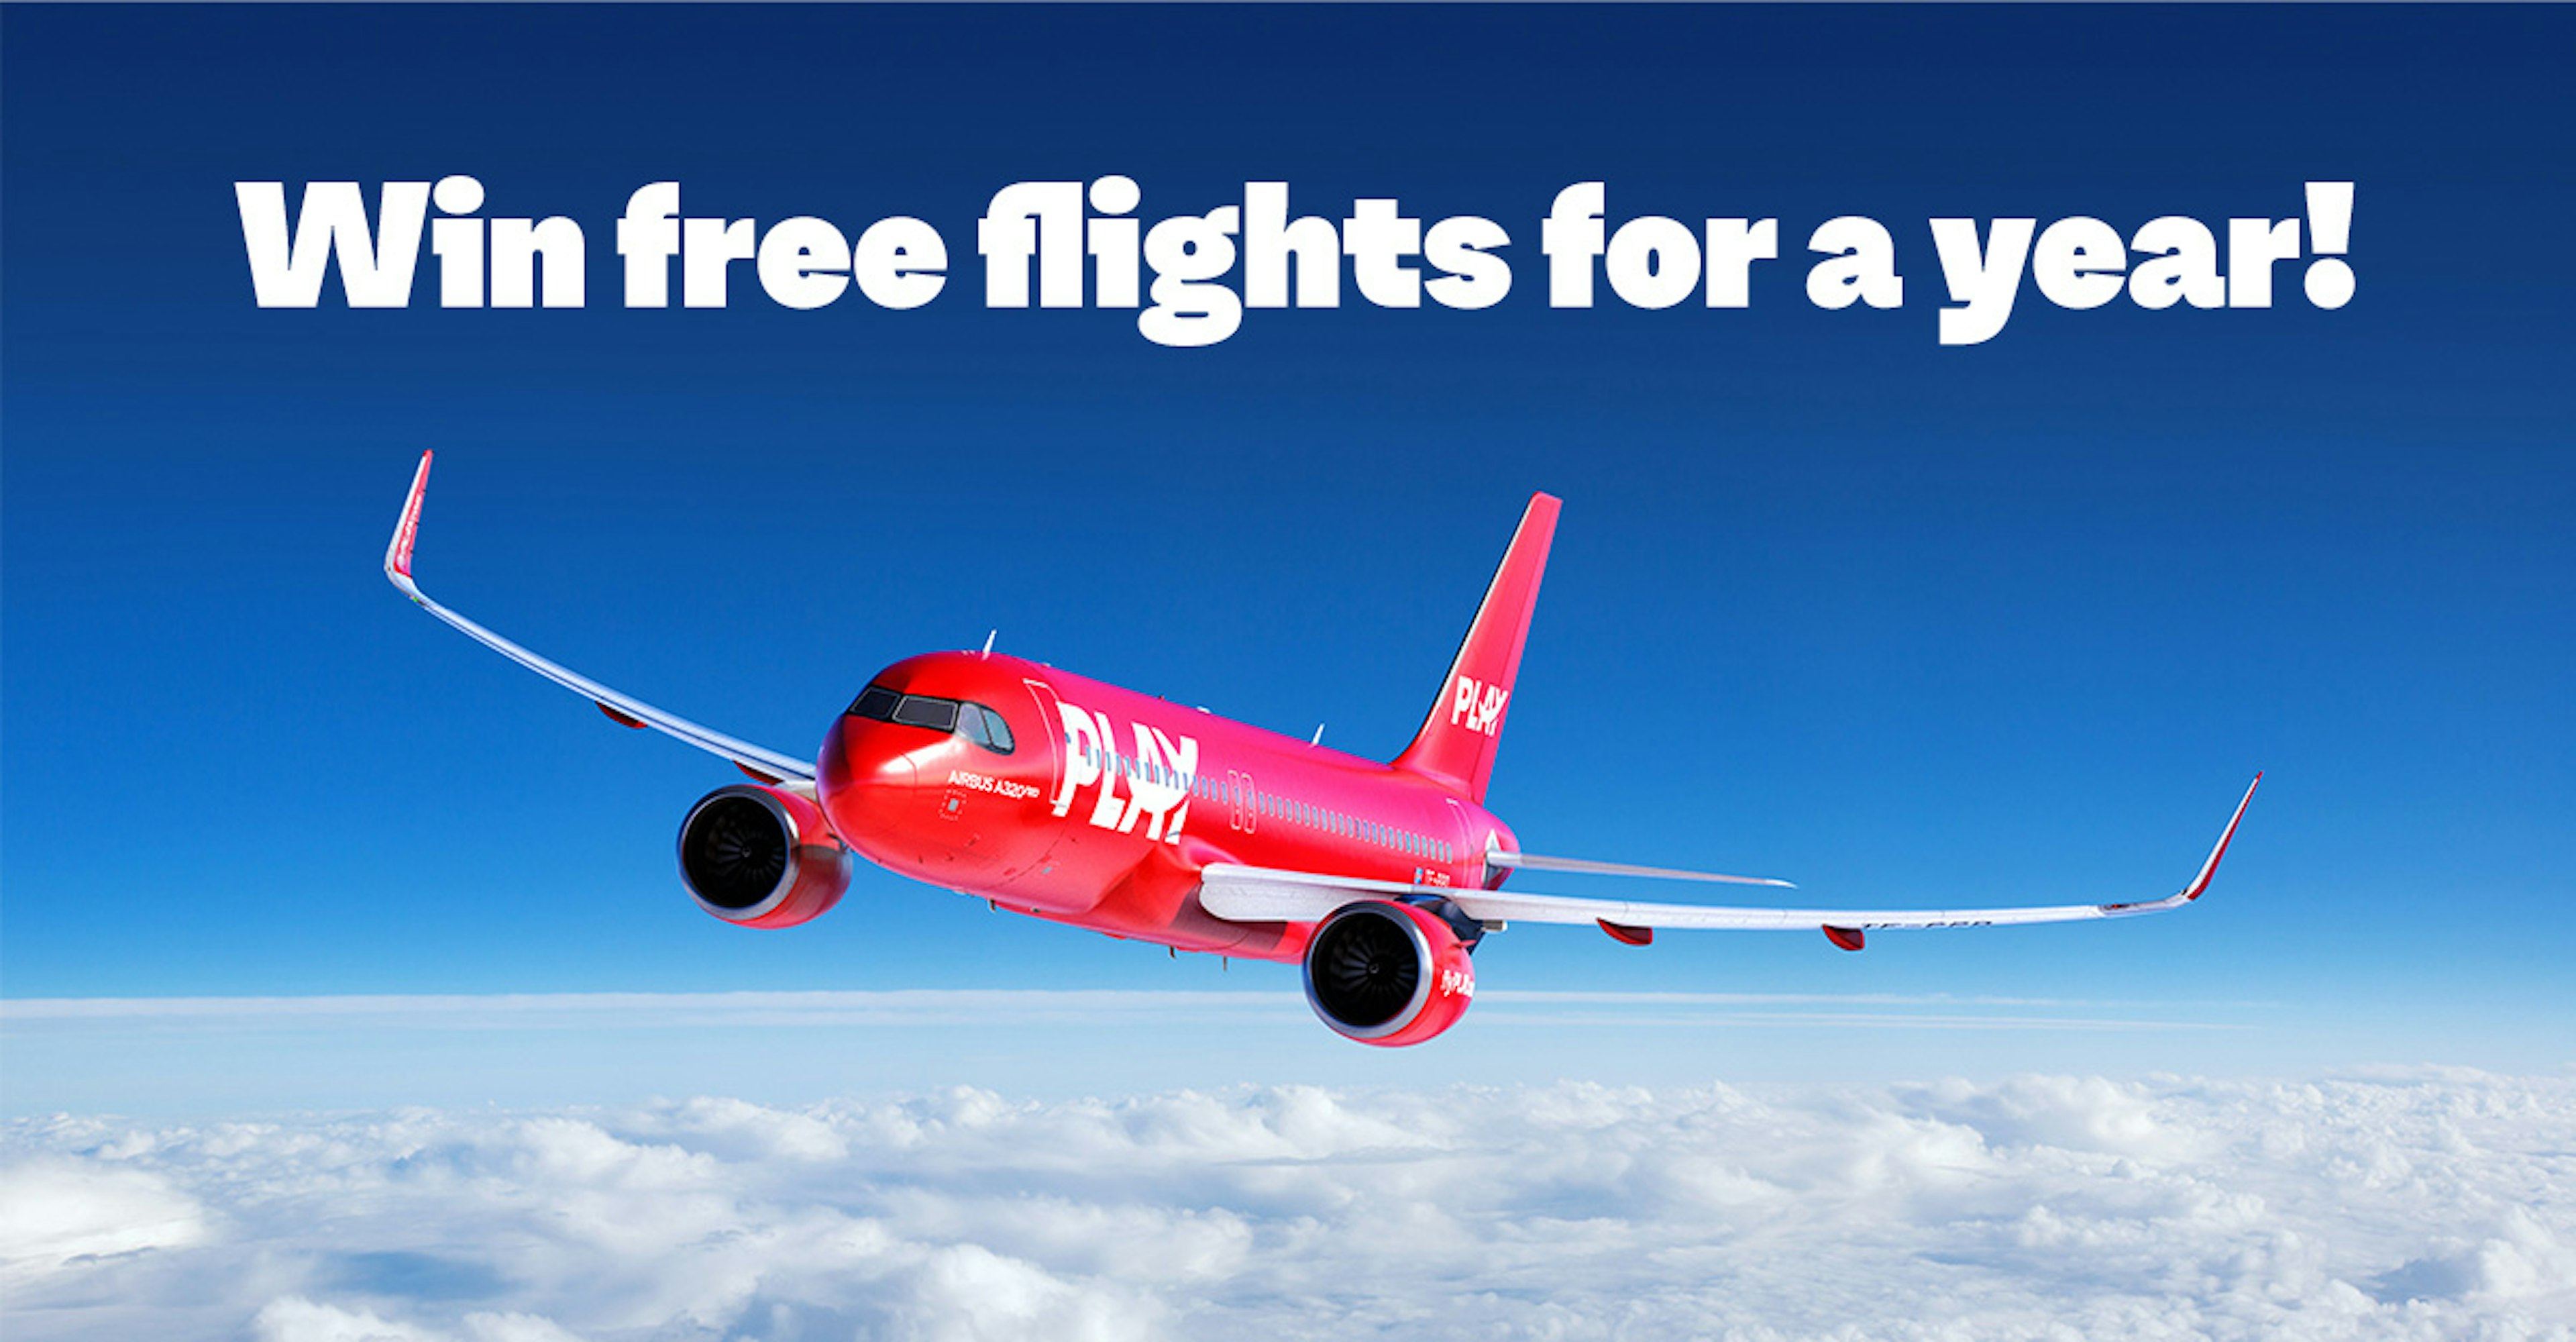 A red PLAY aircraft in the skies with the words "Win free flights for a year!"